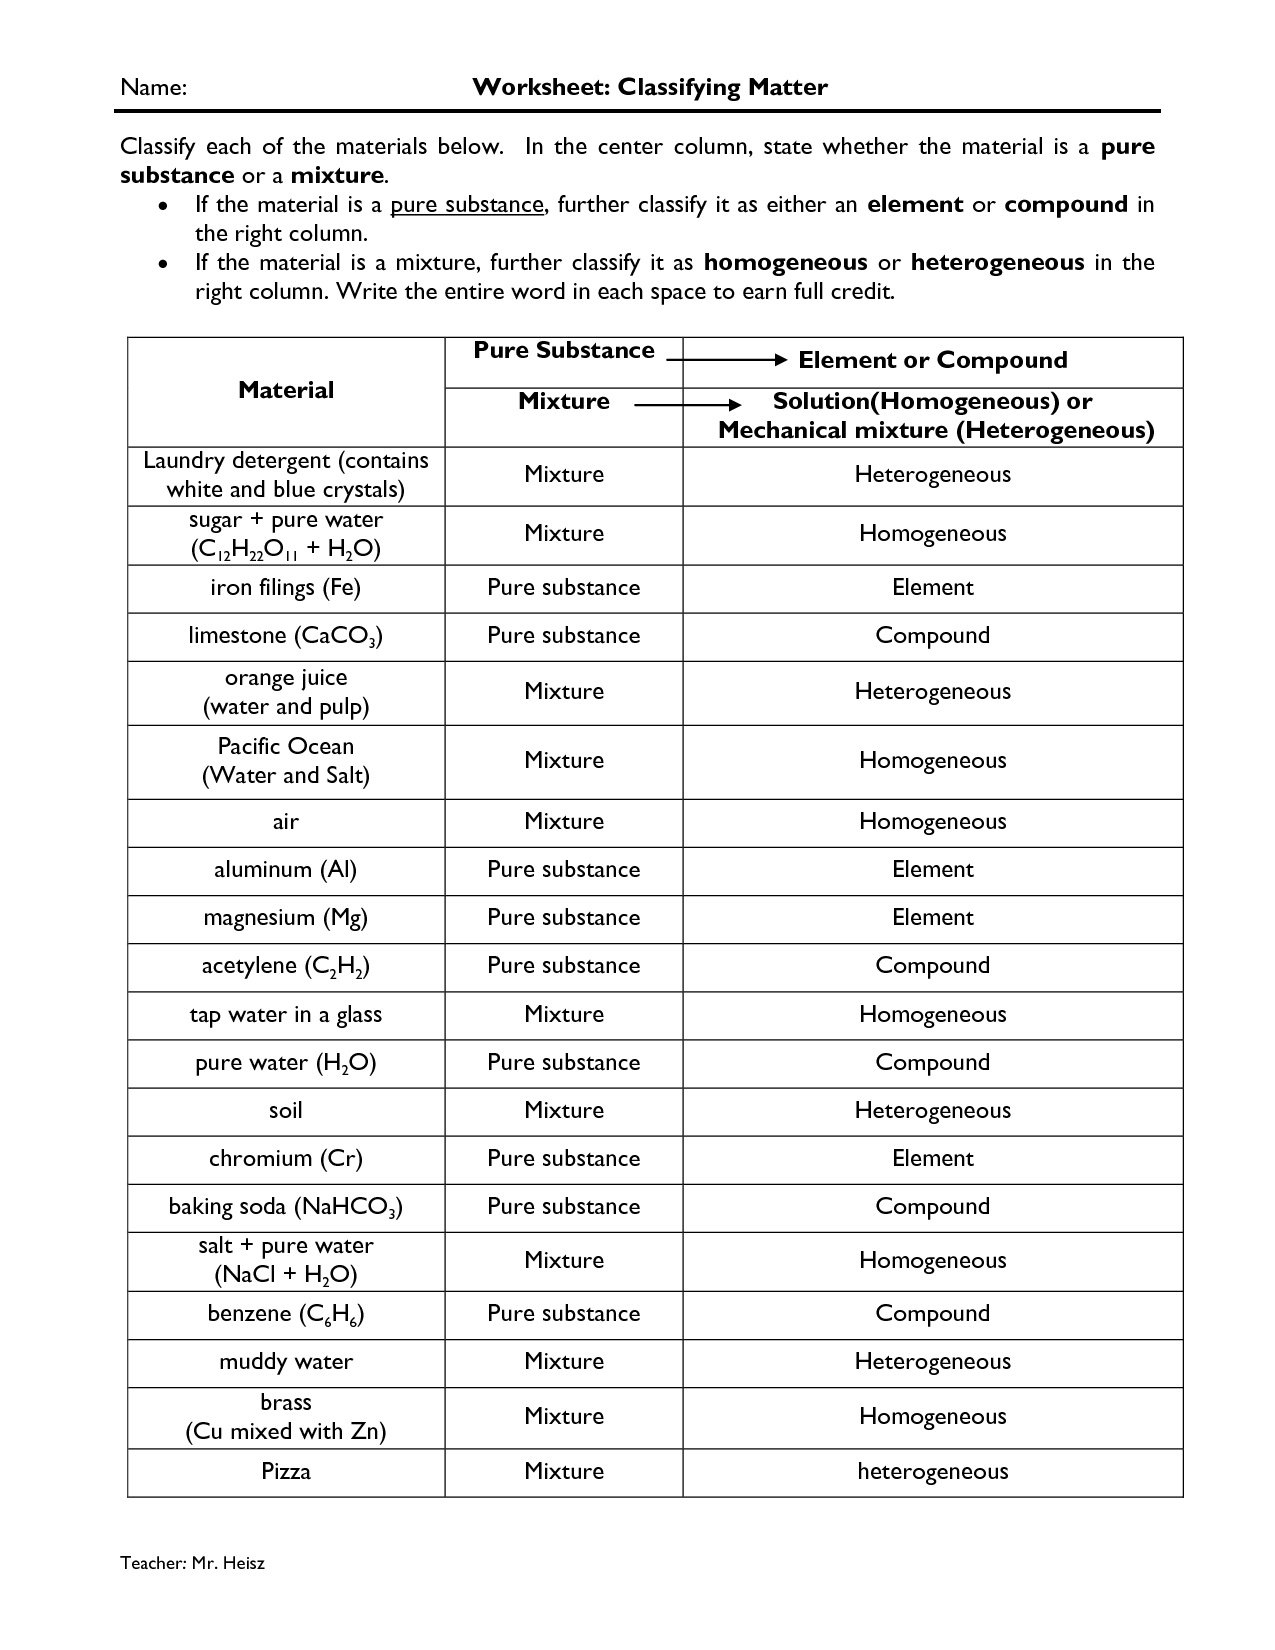 Chemistry Worksheet Matter #22 Answers  mypromosource.com.au Pertaining To Worksheet Classification Of Matter